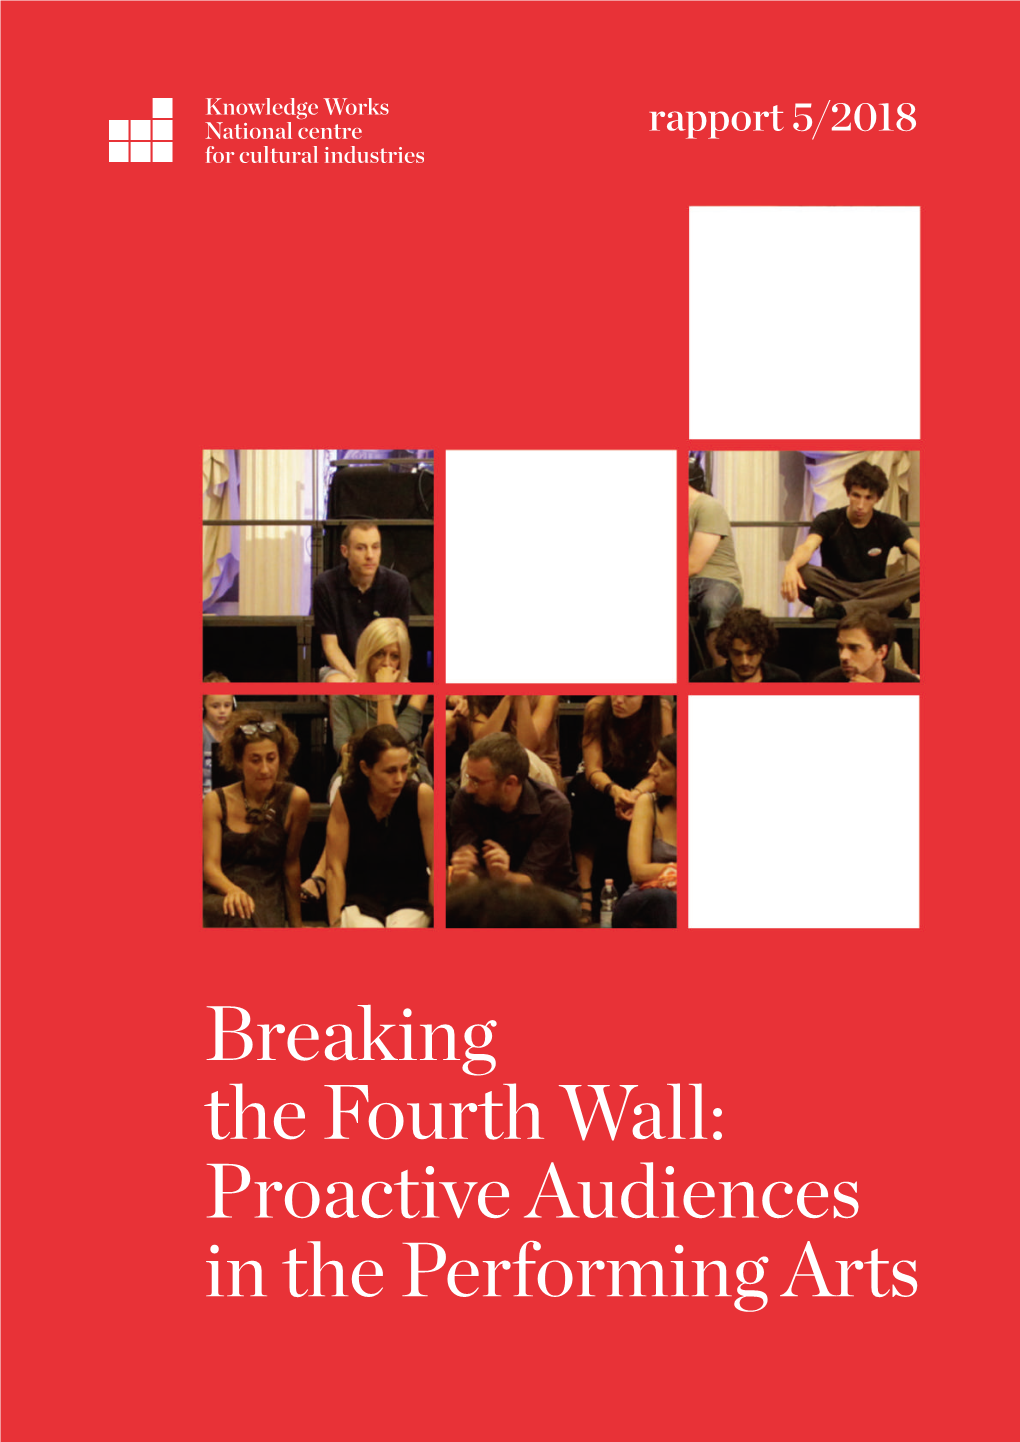 Breaking the Fourth Wall: Proactive Audiences in the Performing Arts